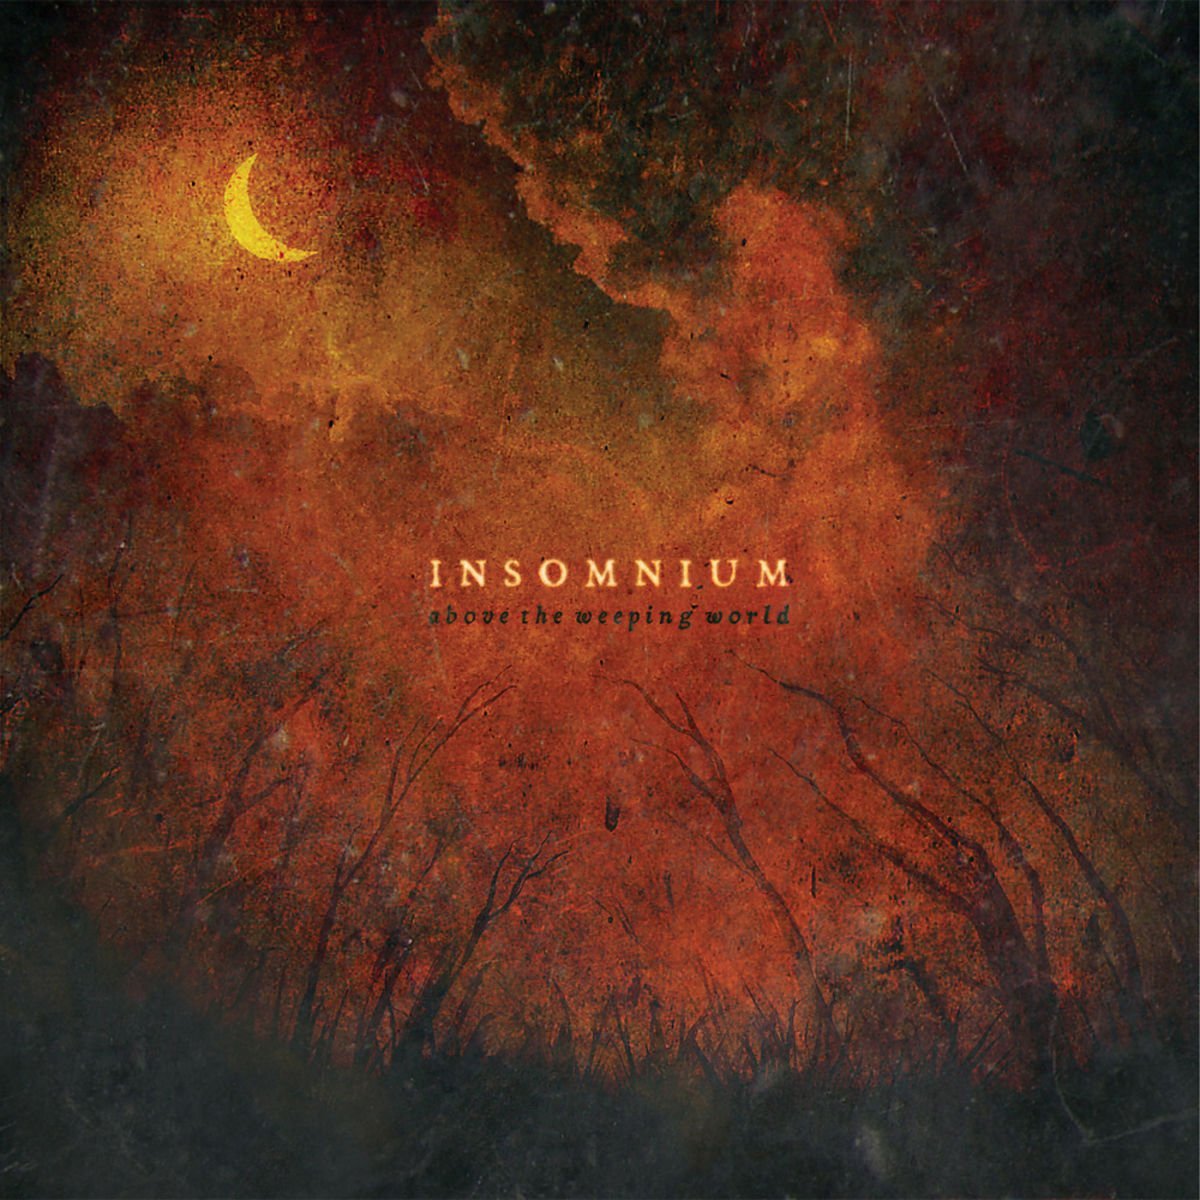 CD Shop - INSOMNIUM ABOVE THE WEEPING WORLD